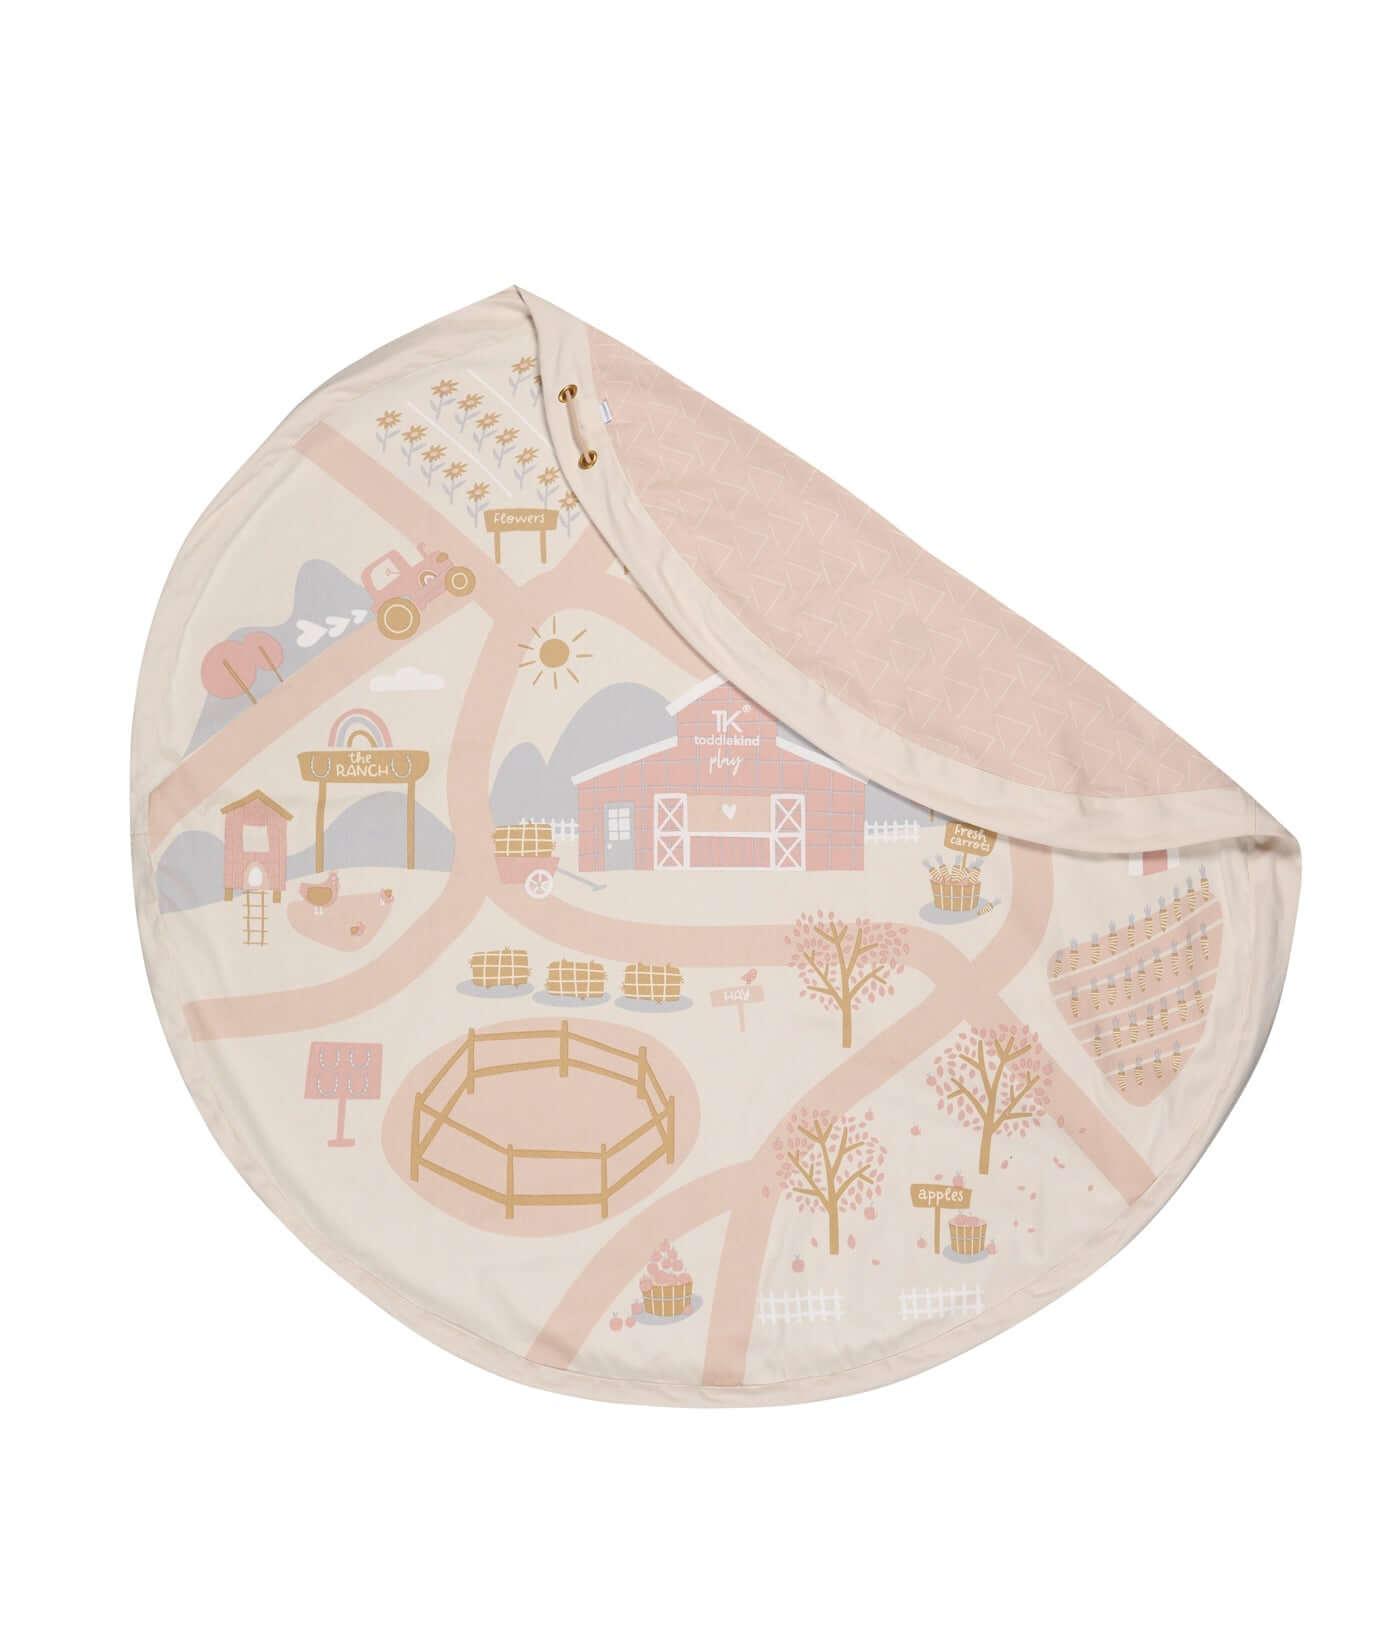 2-in-1 Playmat + Toy Bag | The Ranch